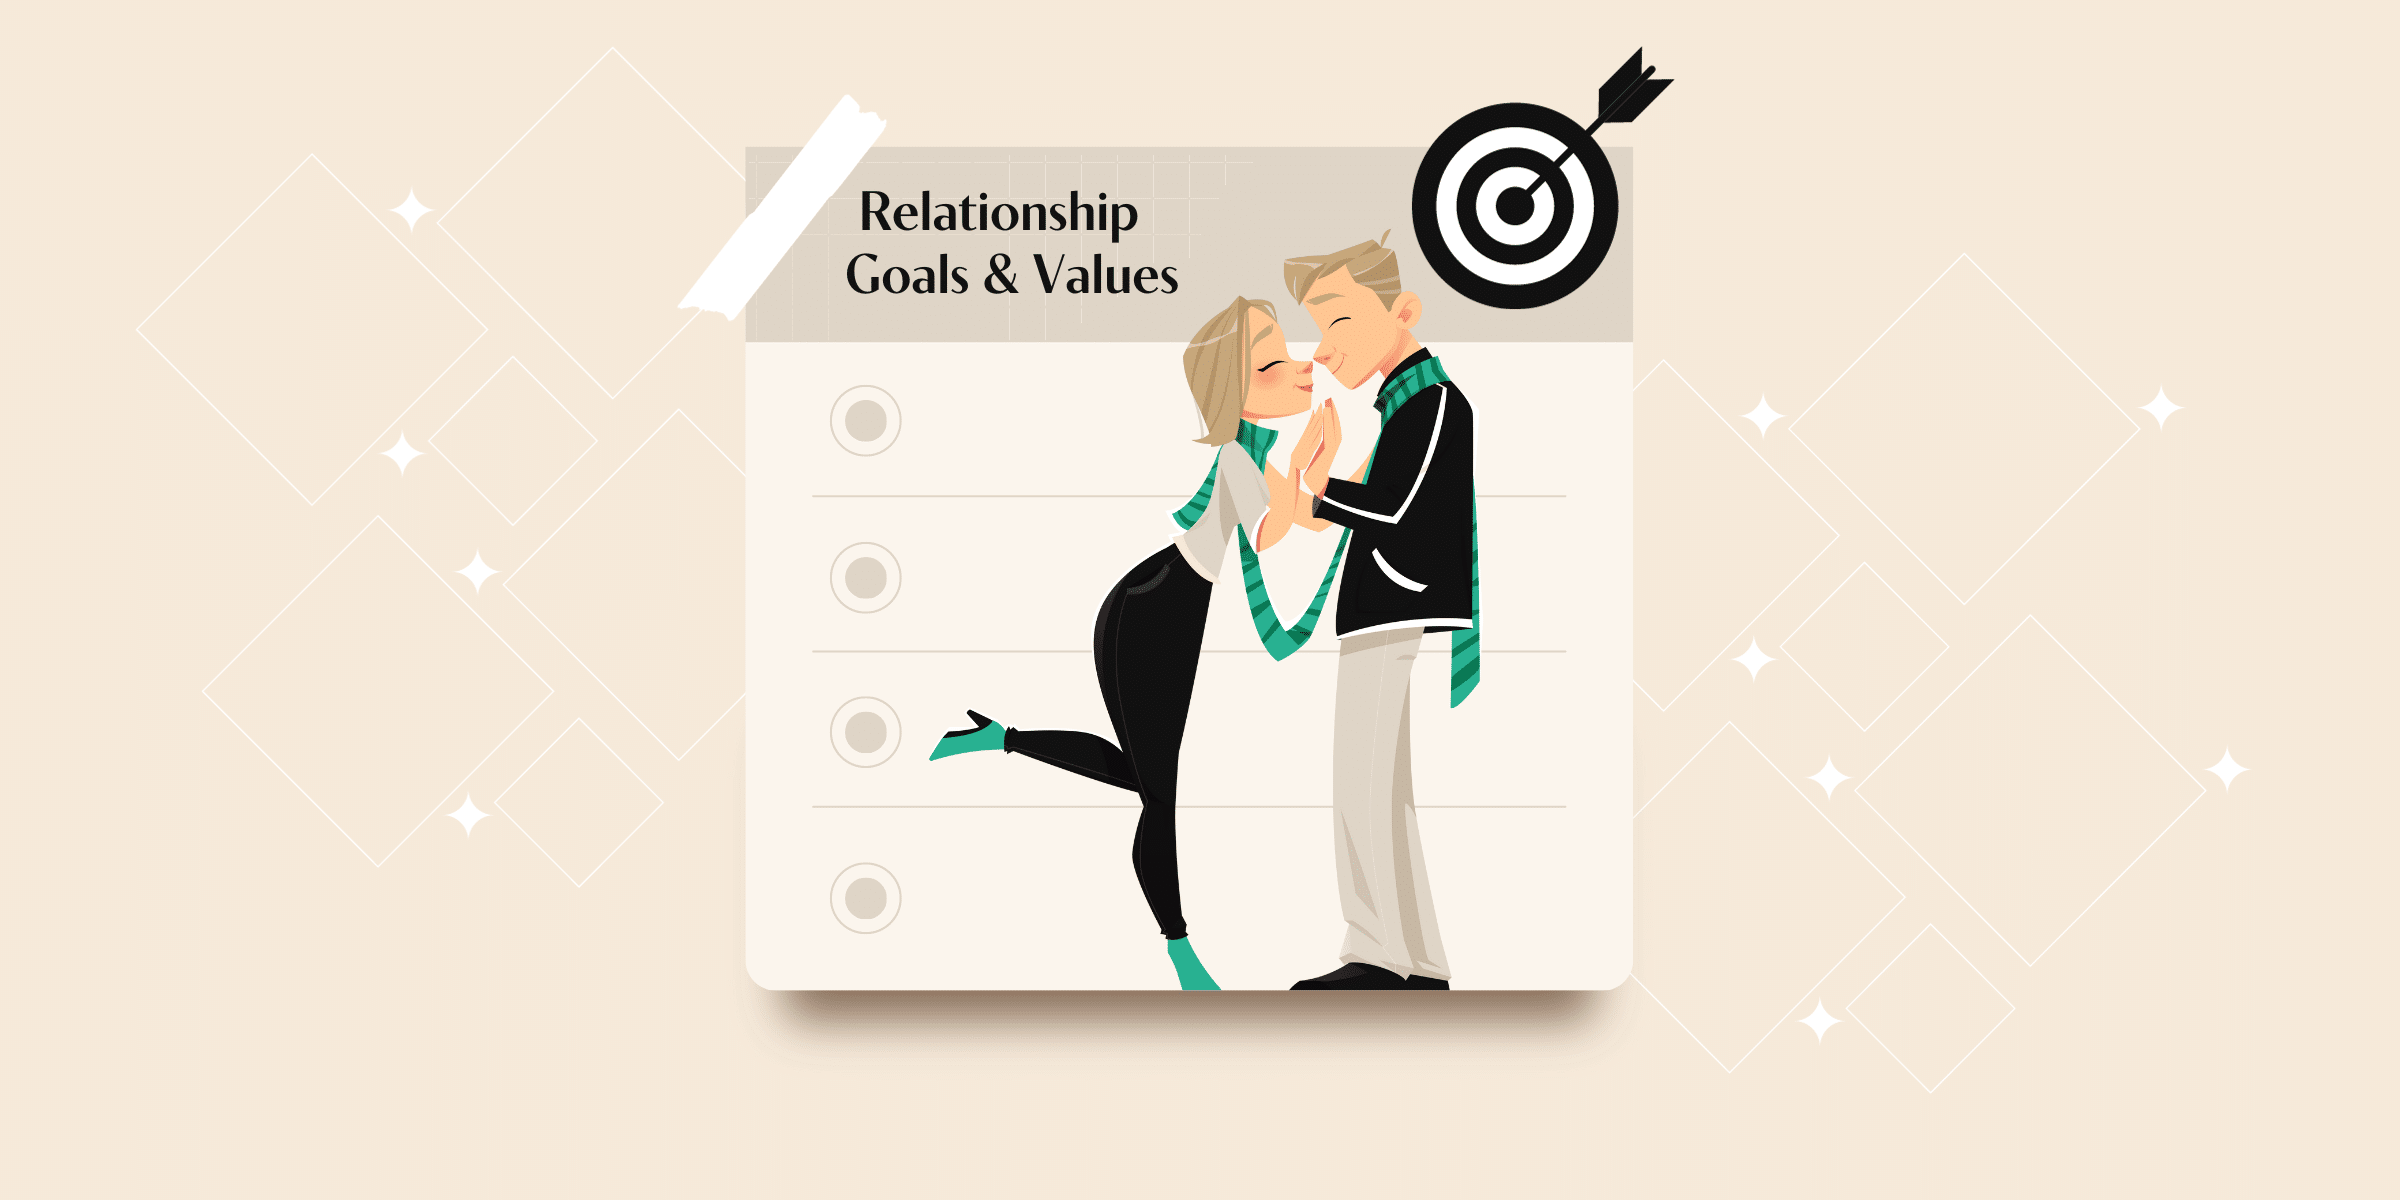 Want to know the key to dating and relationship success? Aligning on relationship goals and values. Learn how to discover and define yours here.